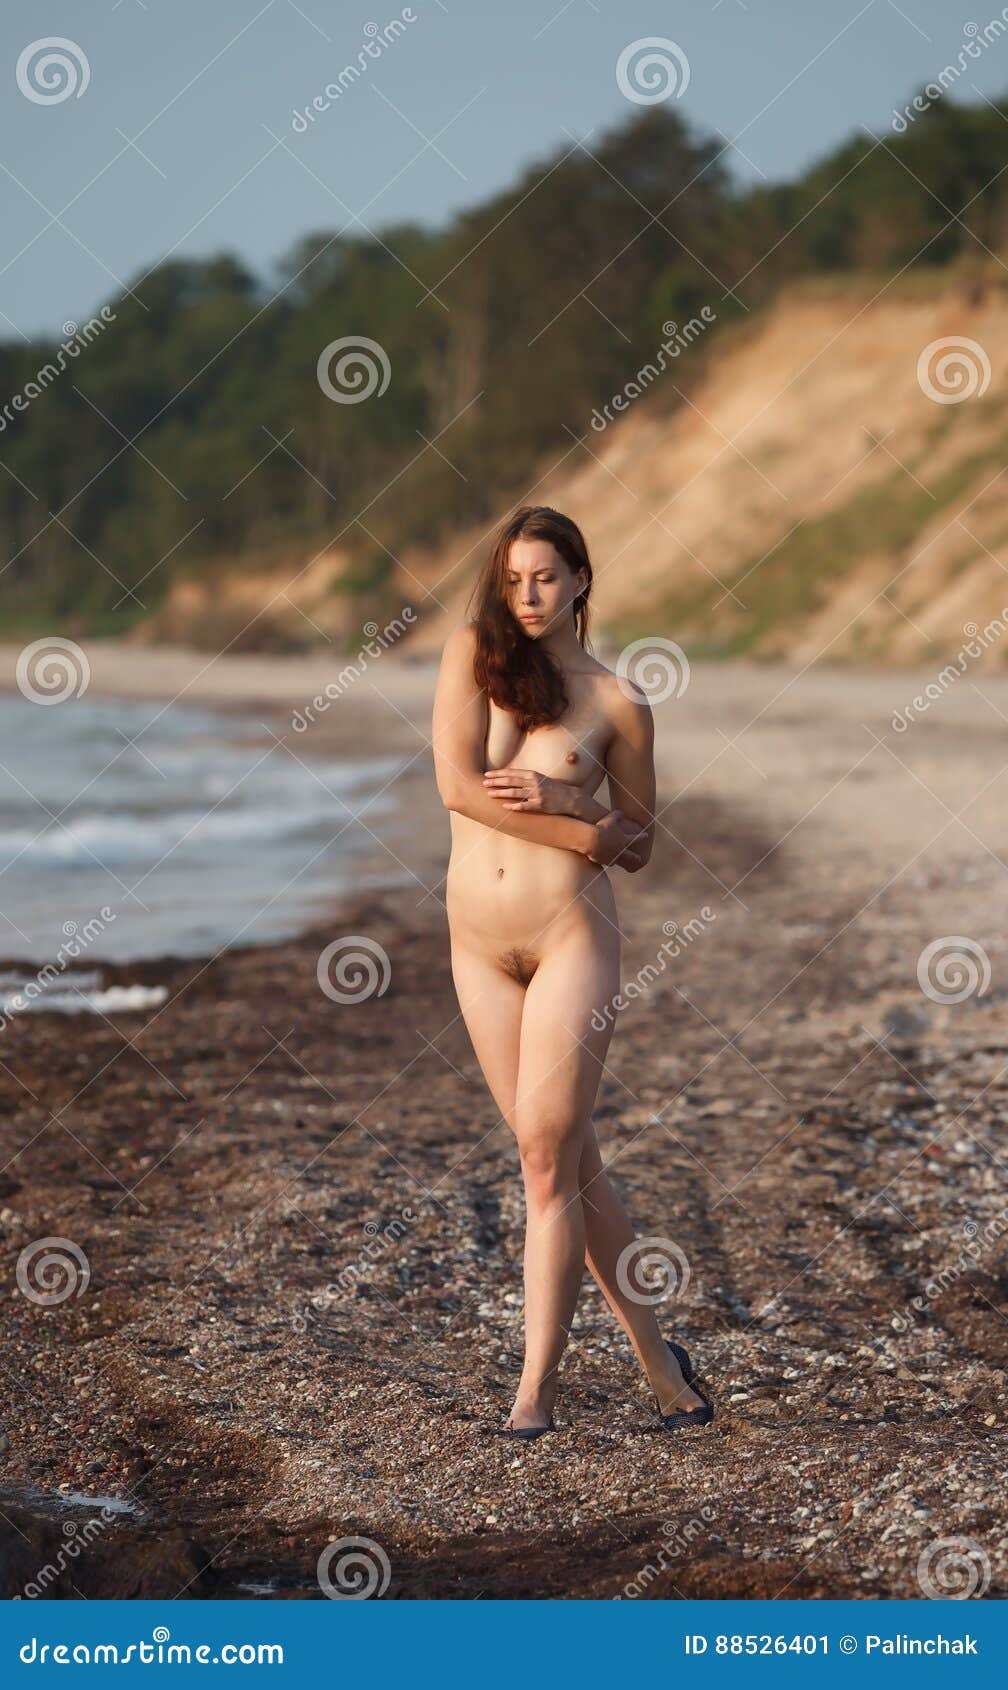 young free nudist women